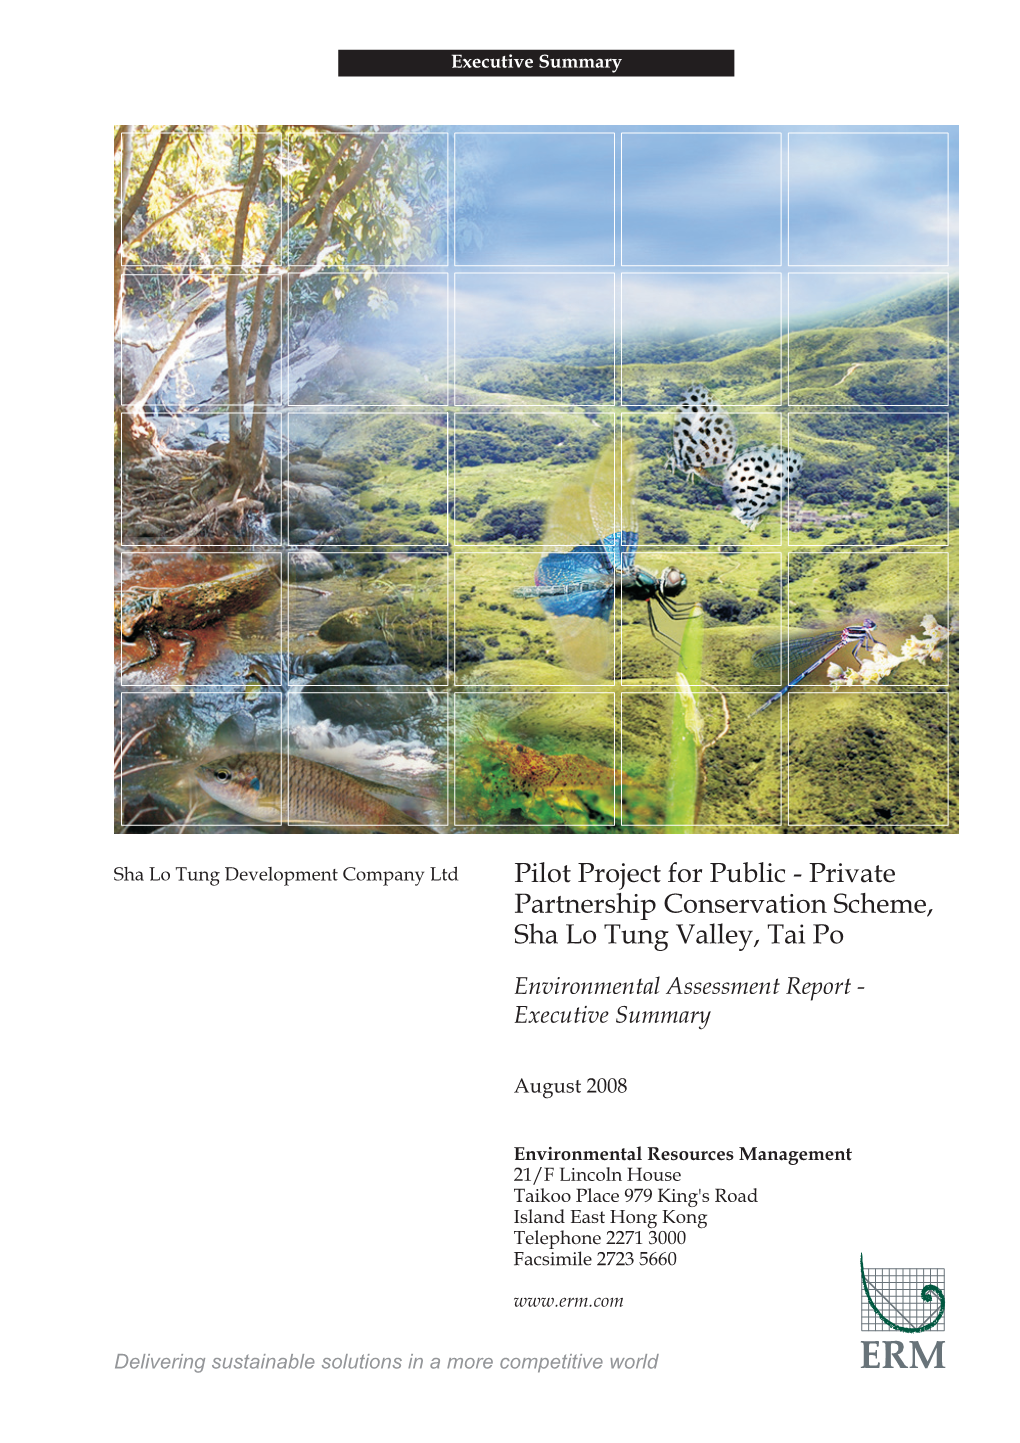 Private Partnership Conservation Scheme, Sha Lo Tung Valley, Tai Po Environmental Assessment